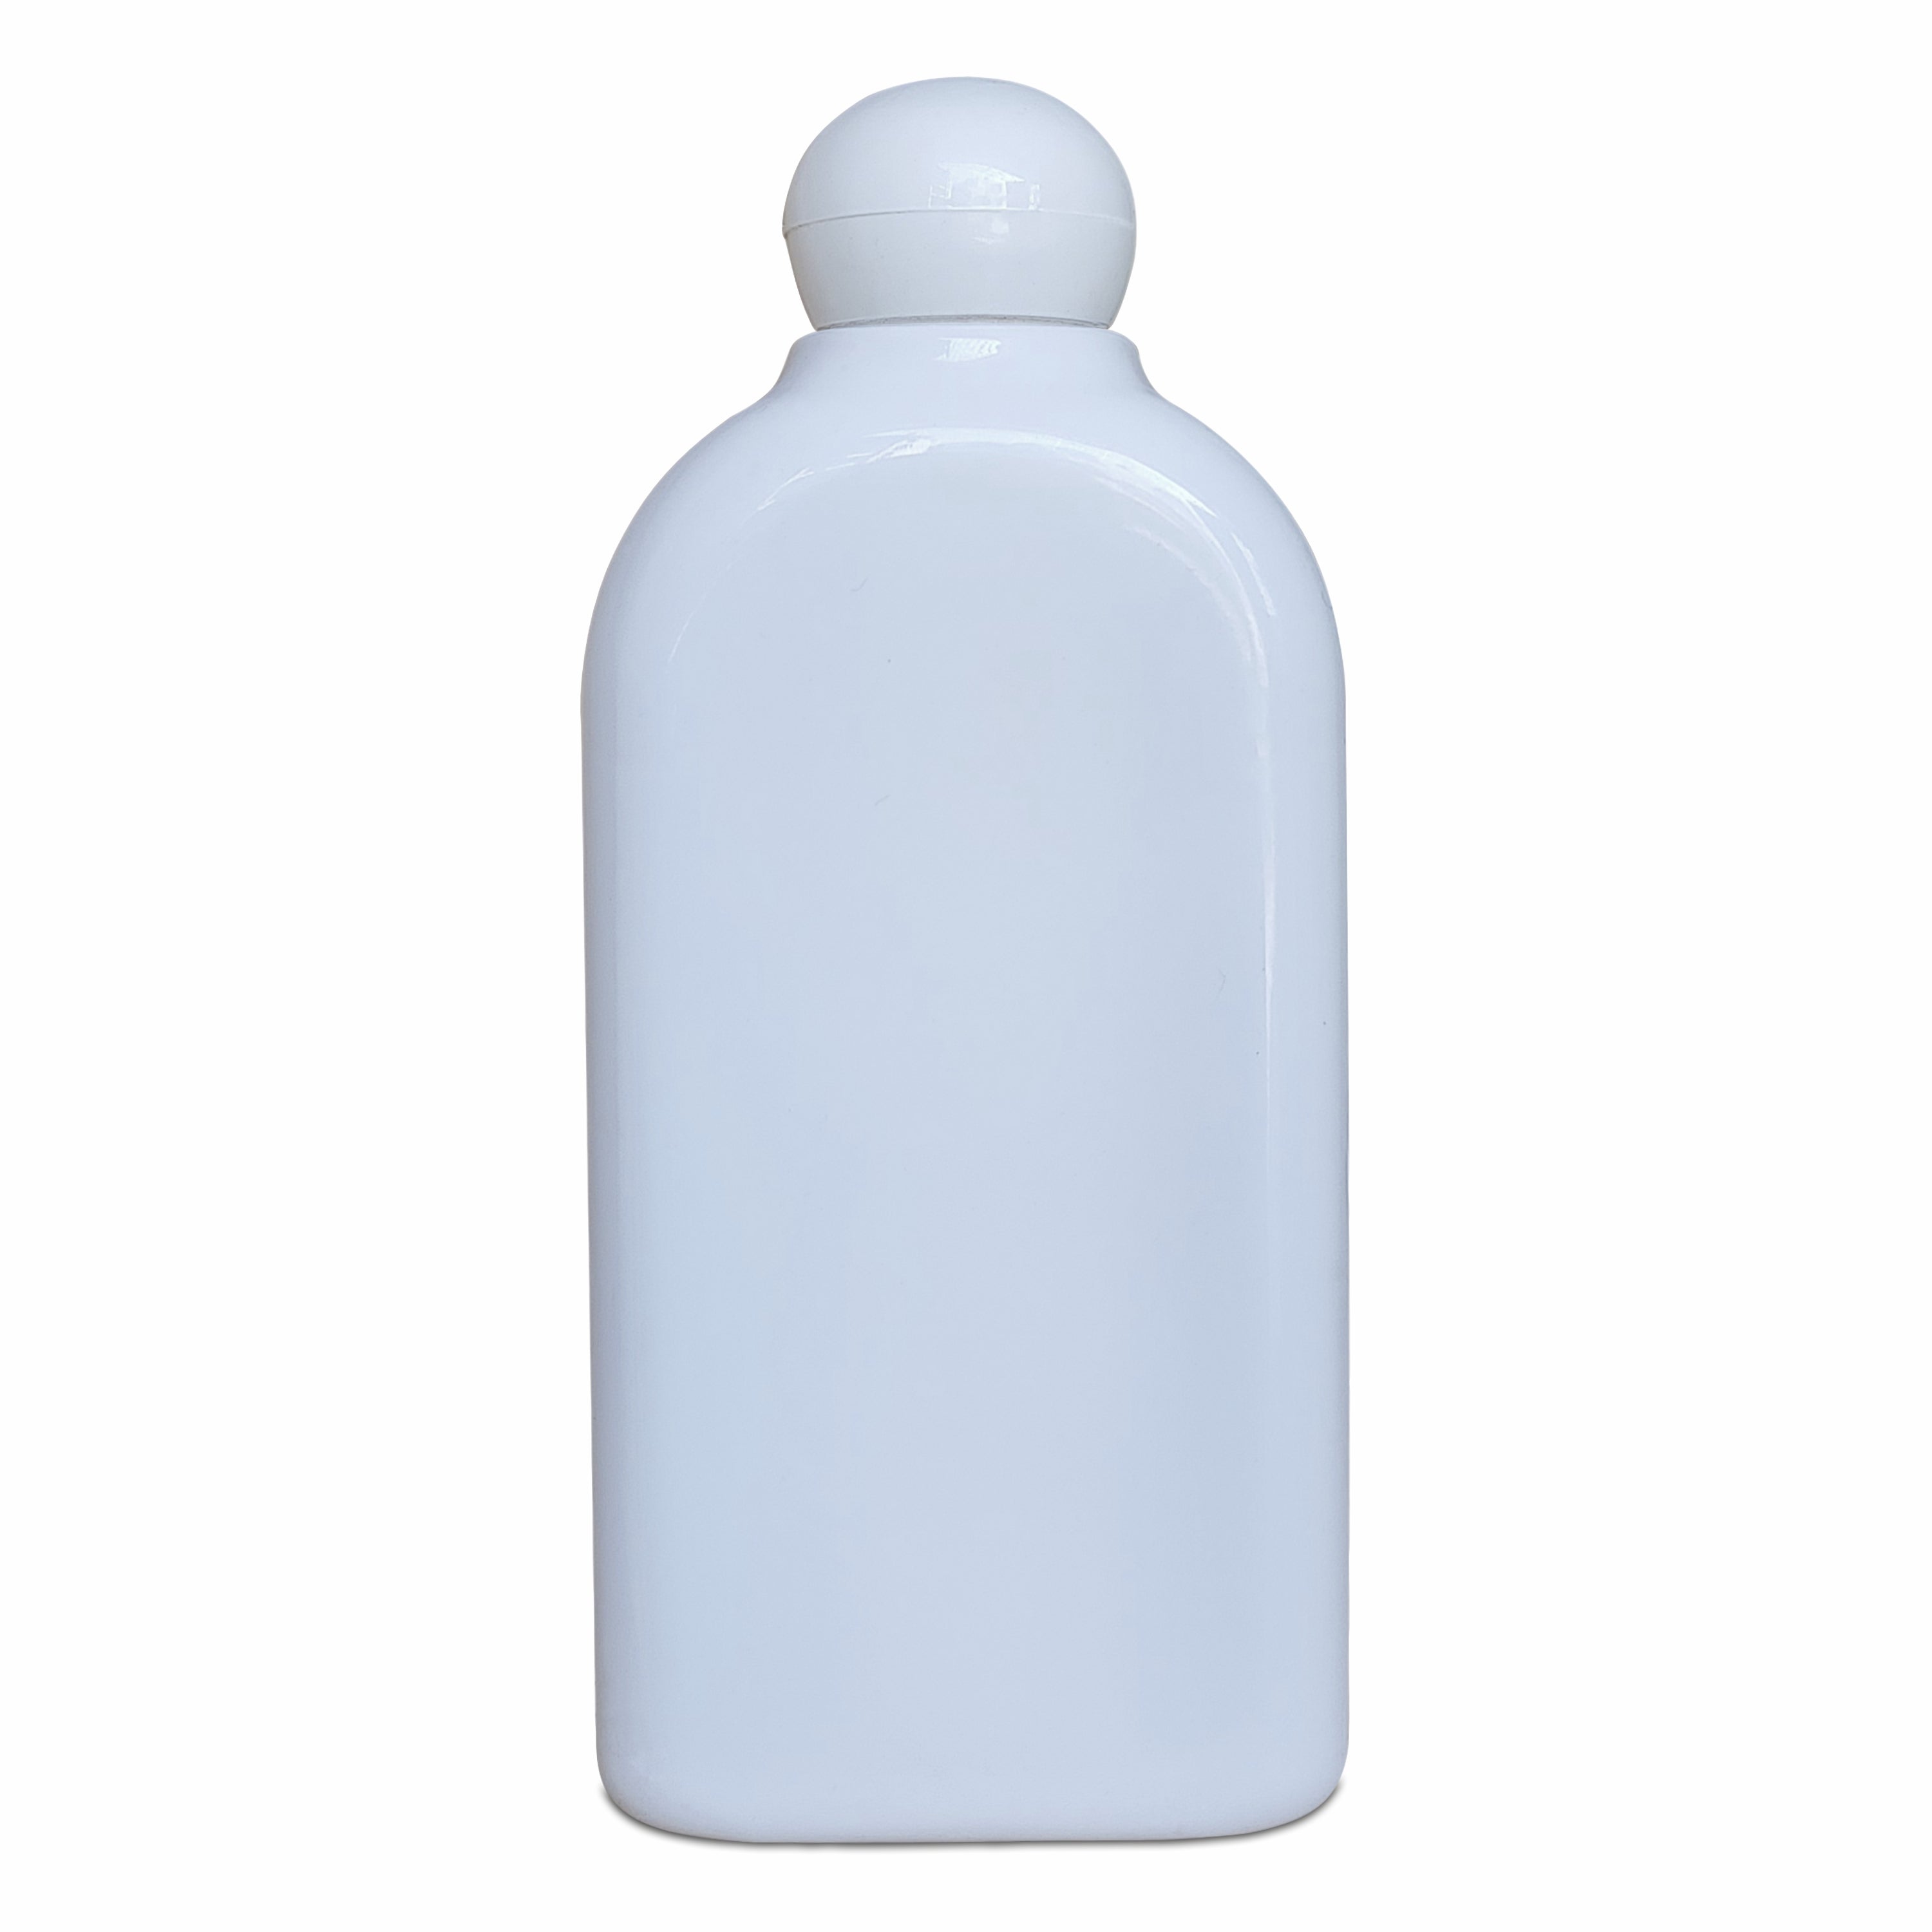 |ZMW77| MILKY WHITE RECTANGLE SHAPE BOTTLE WITH WHITE COLOR ROUND DOME CAP Available Size: 300ml